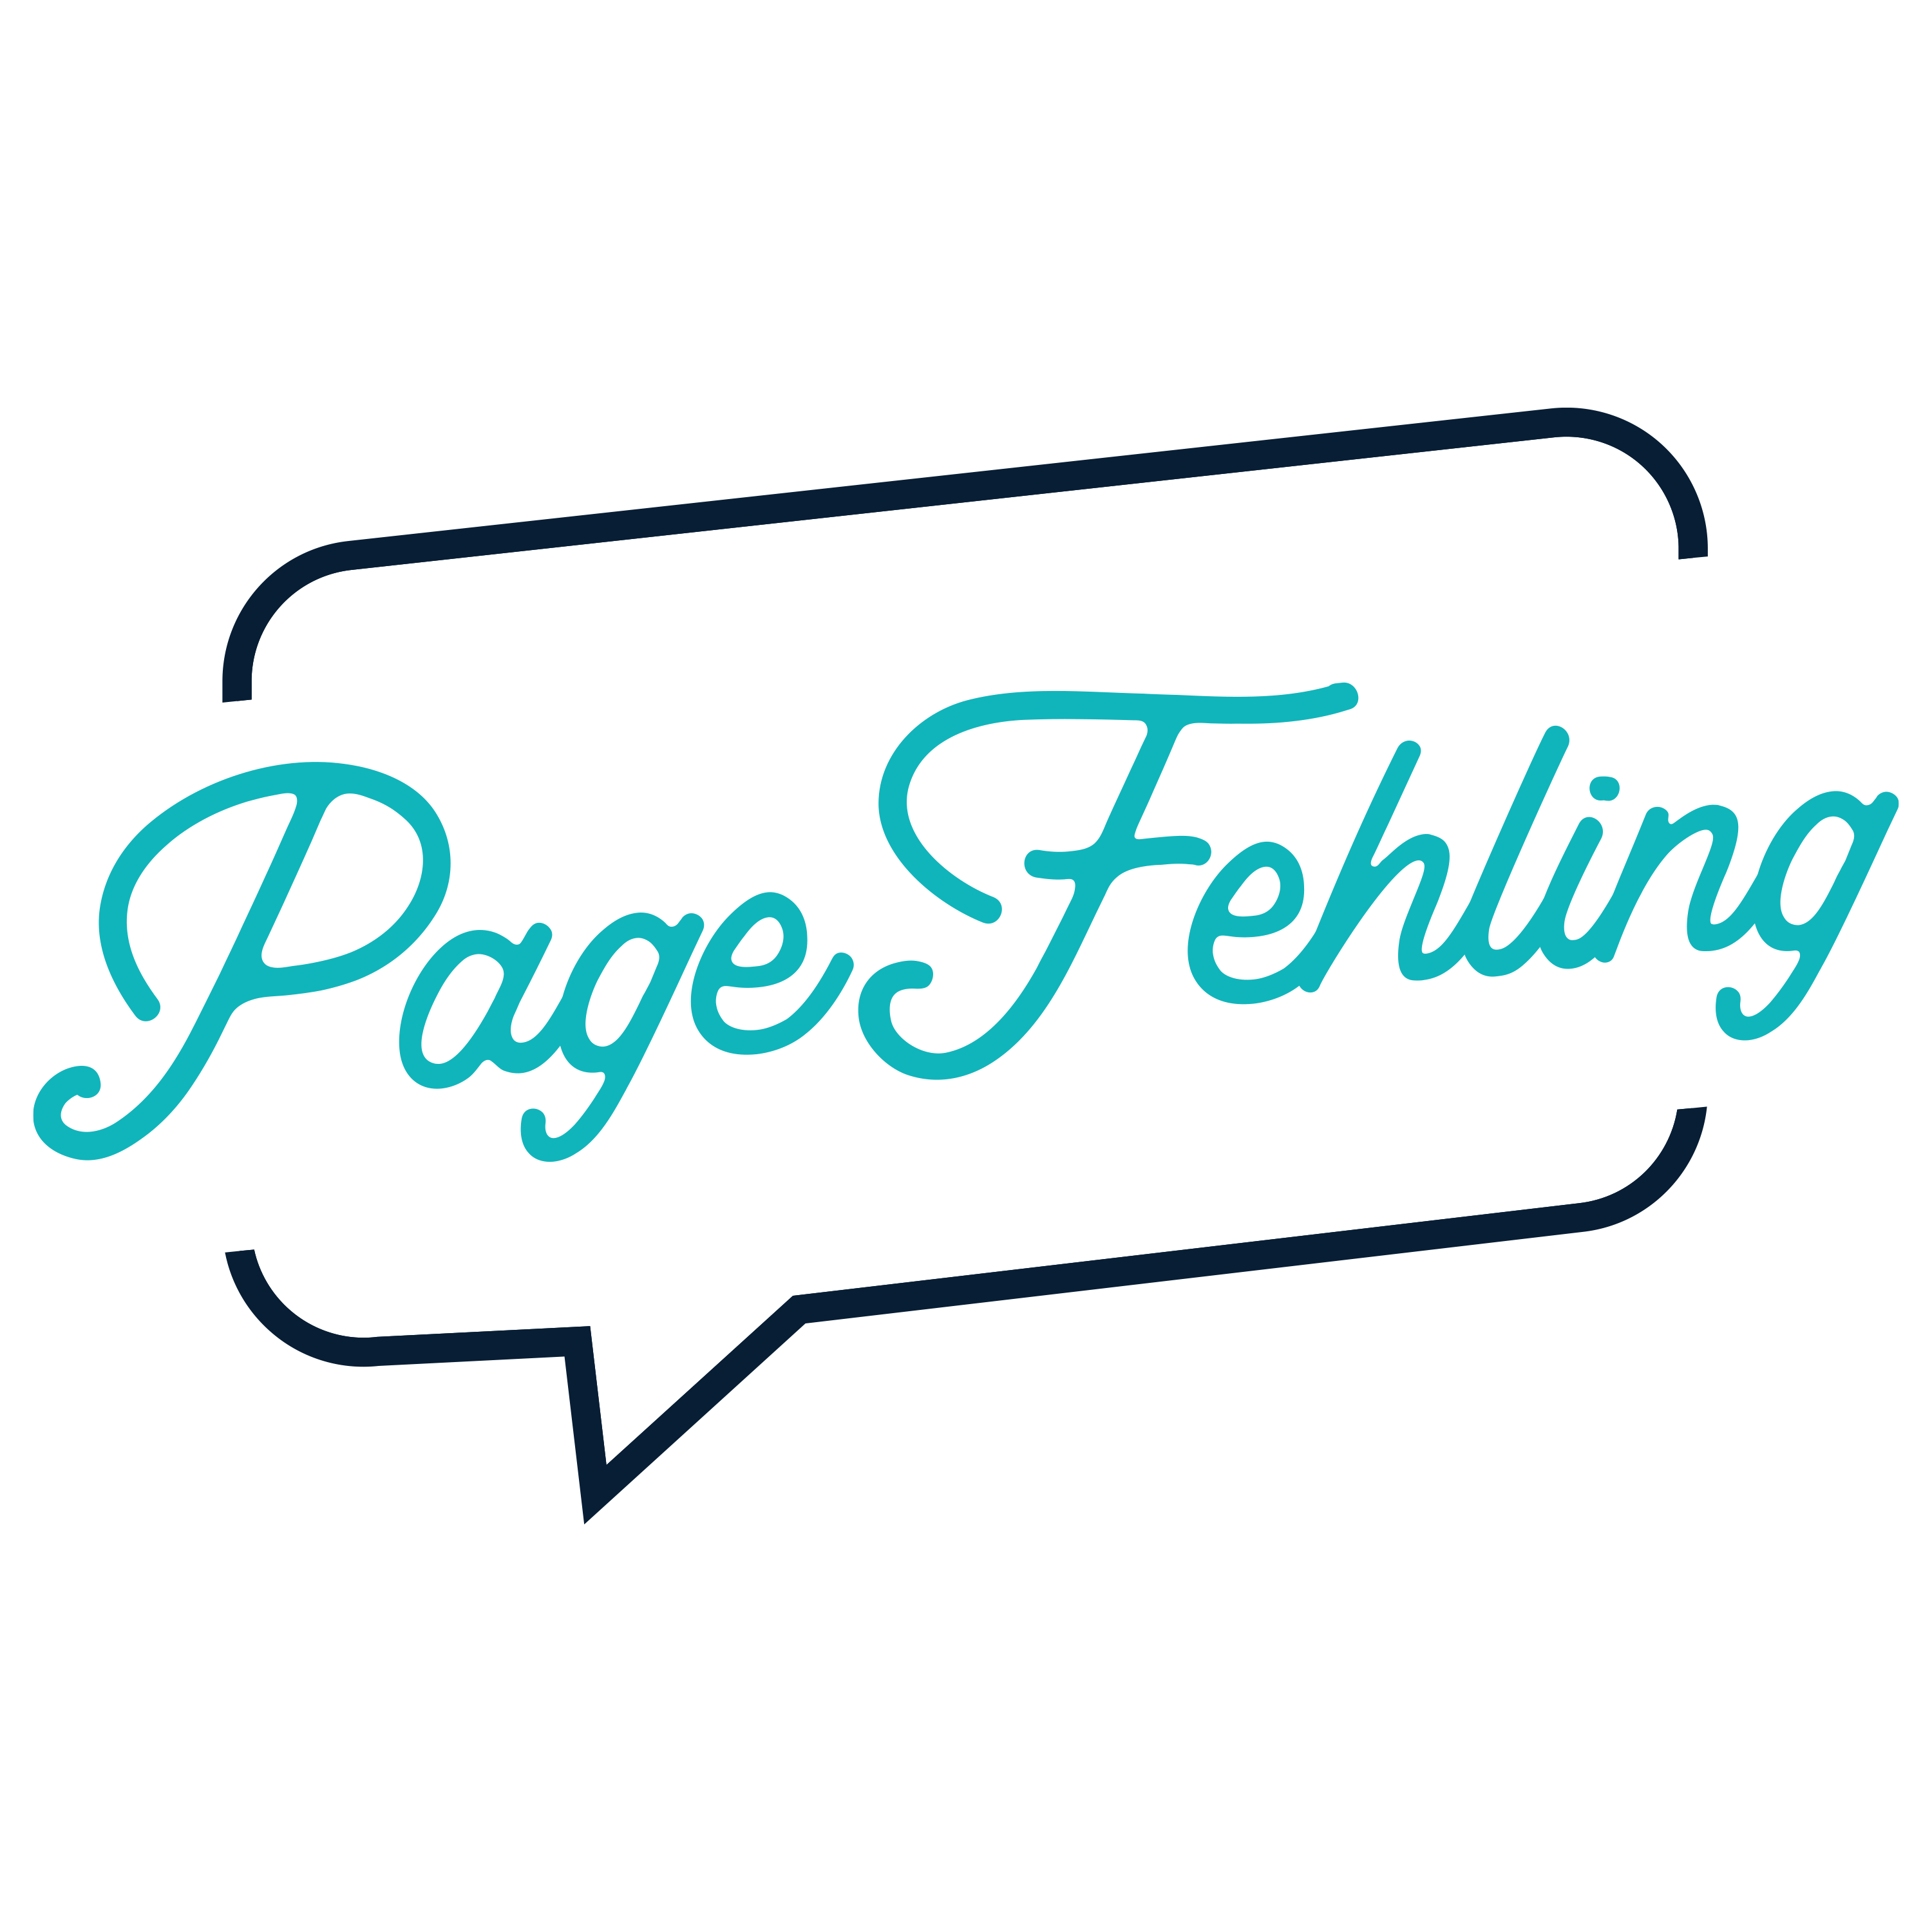 page fehling